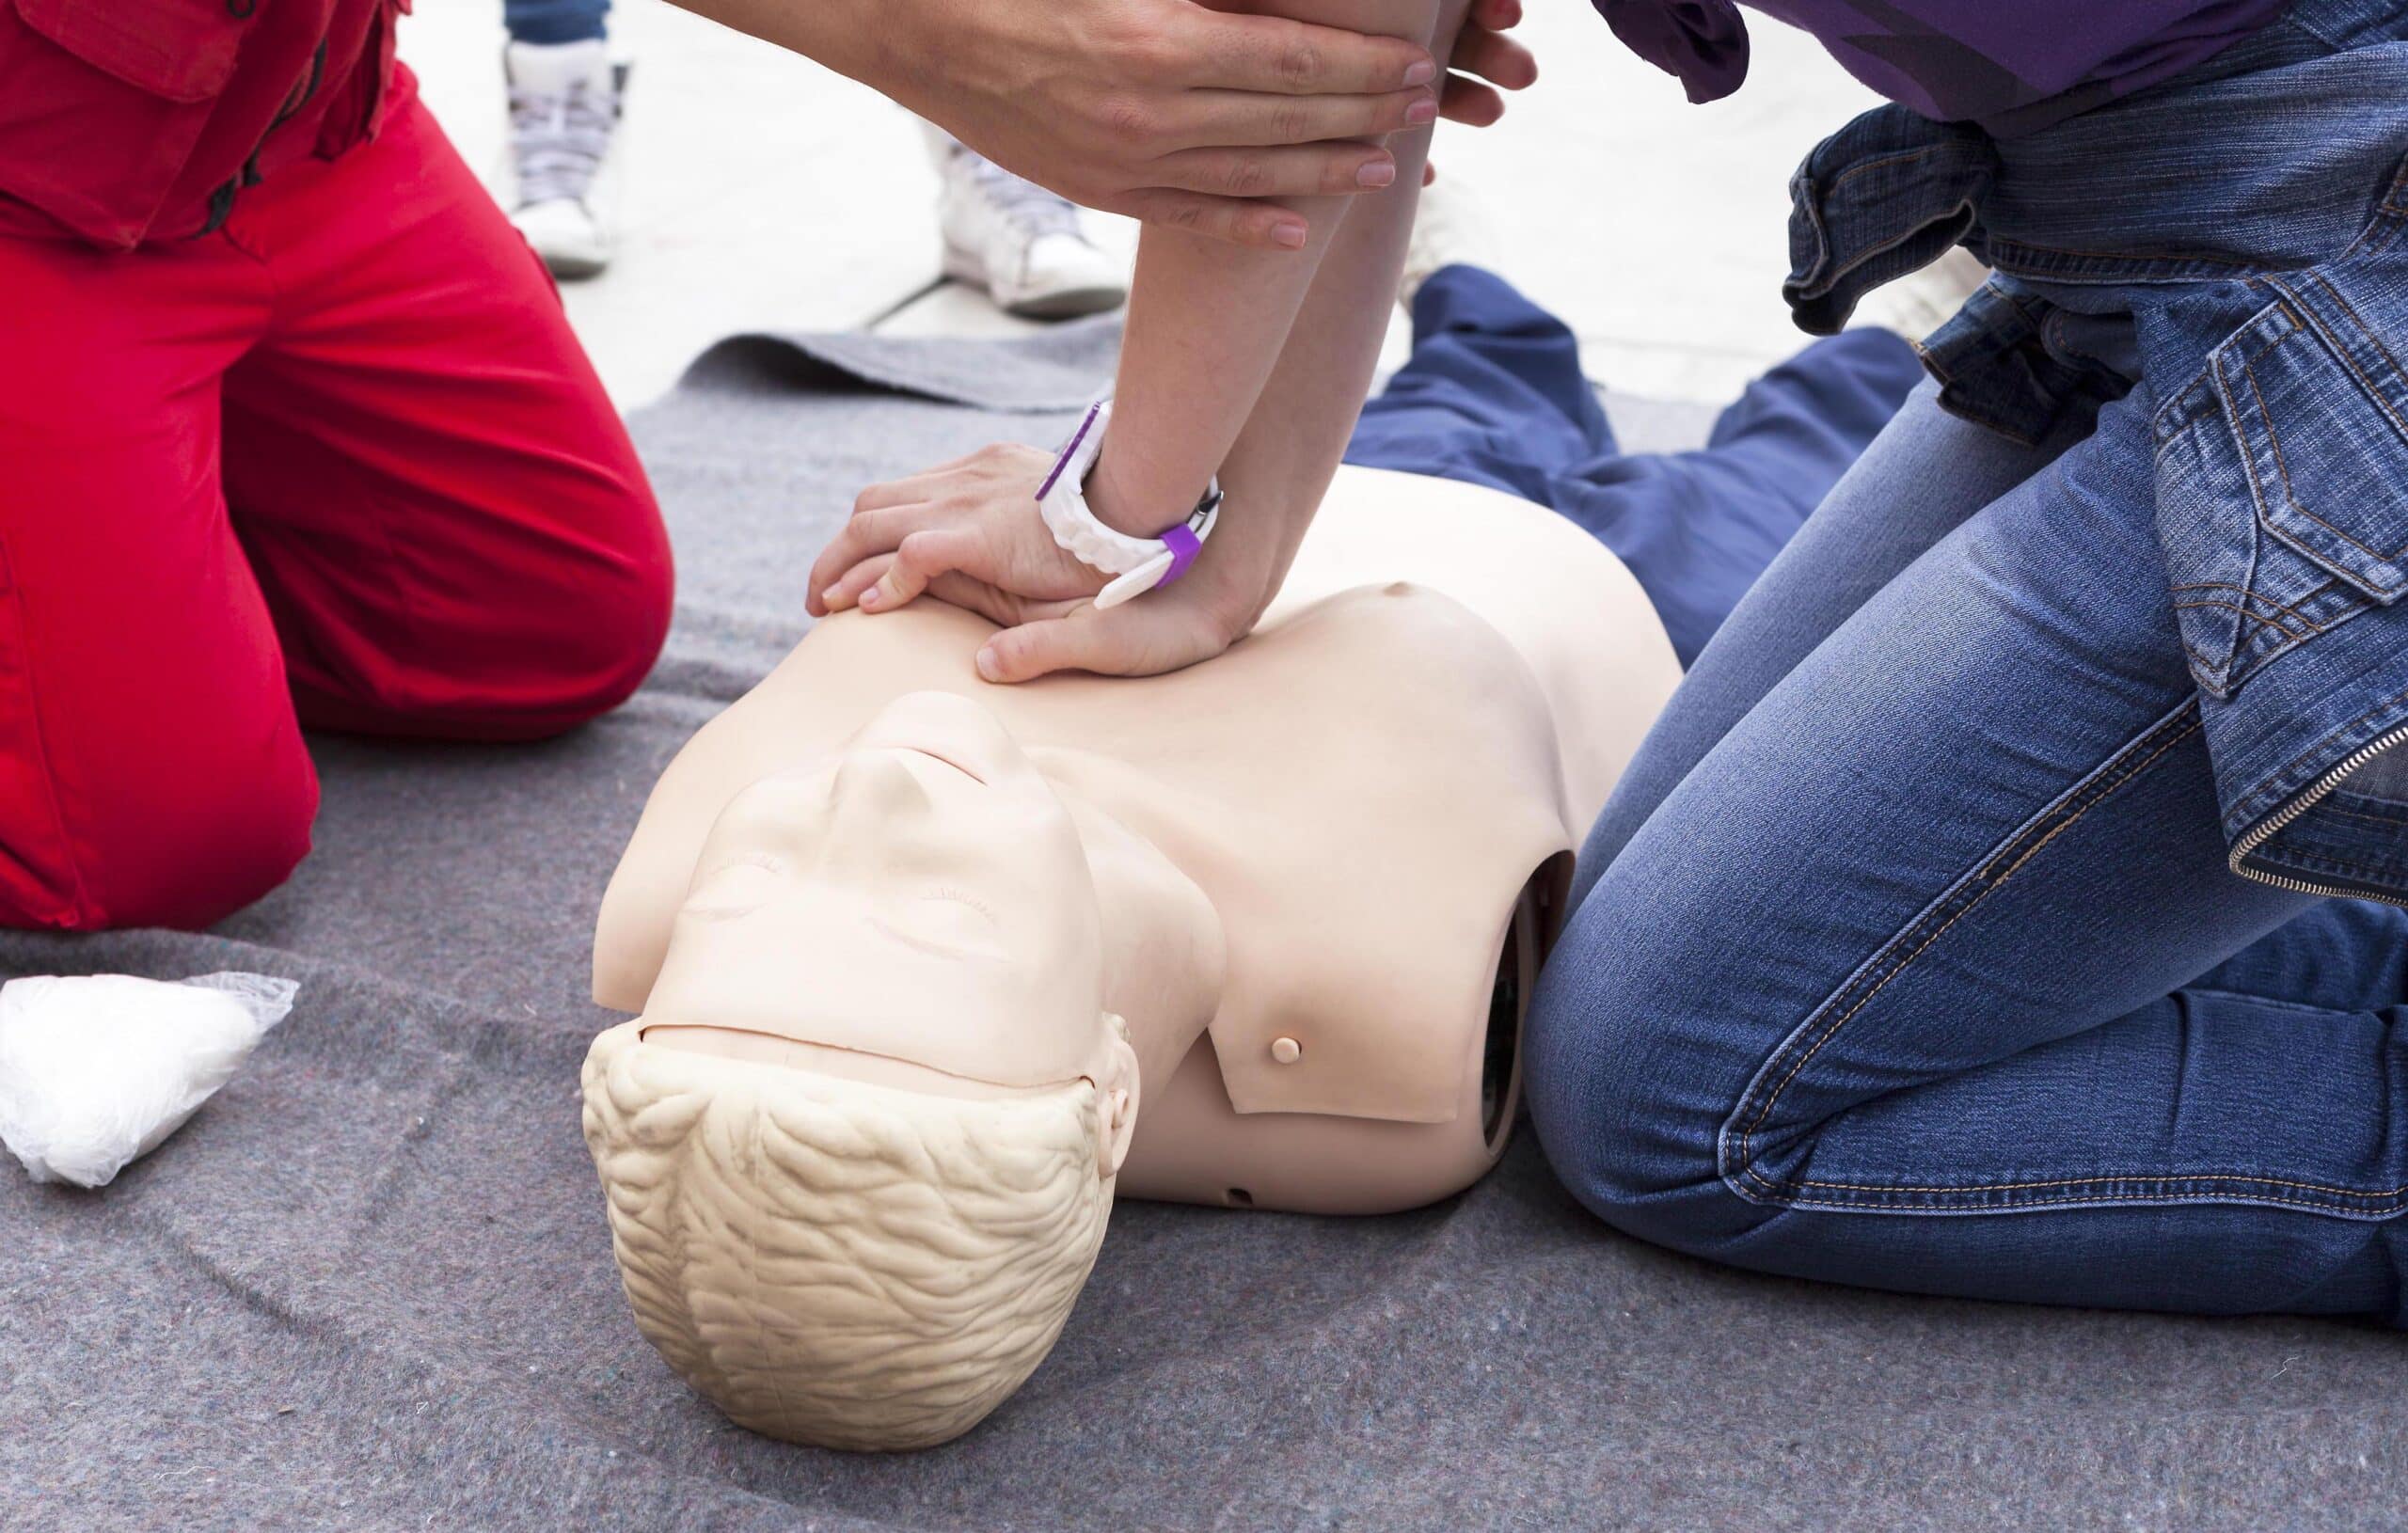 What Are The Responsibilities of A First Aider